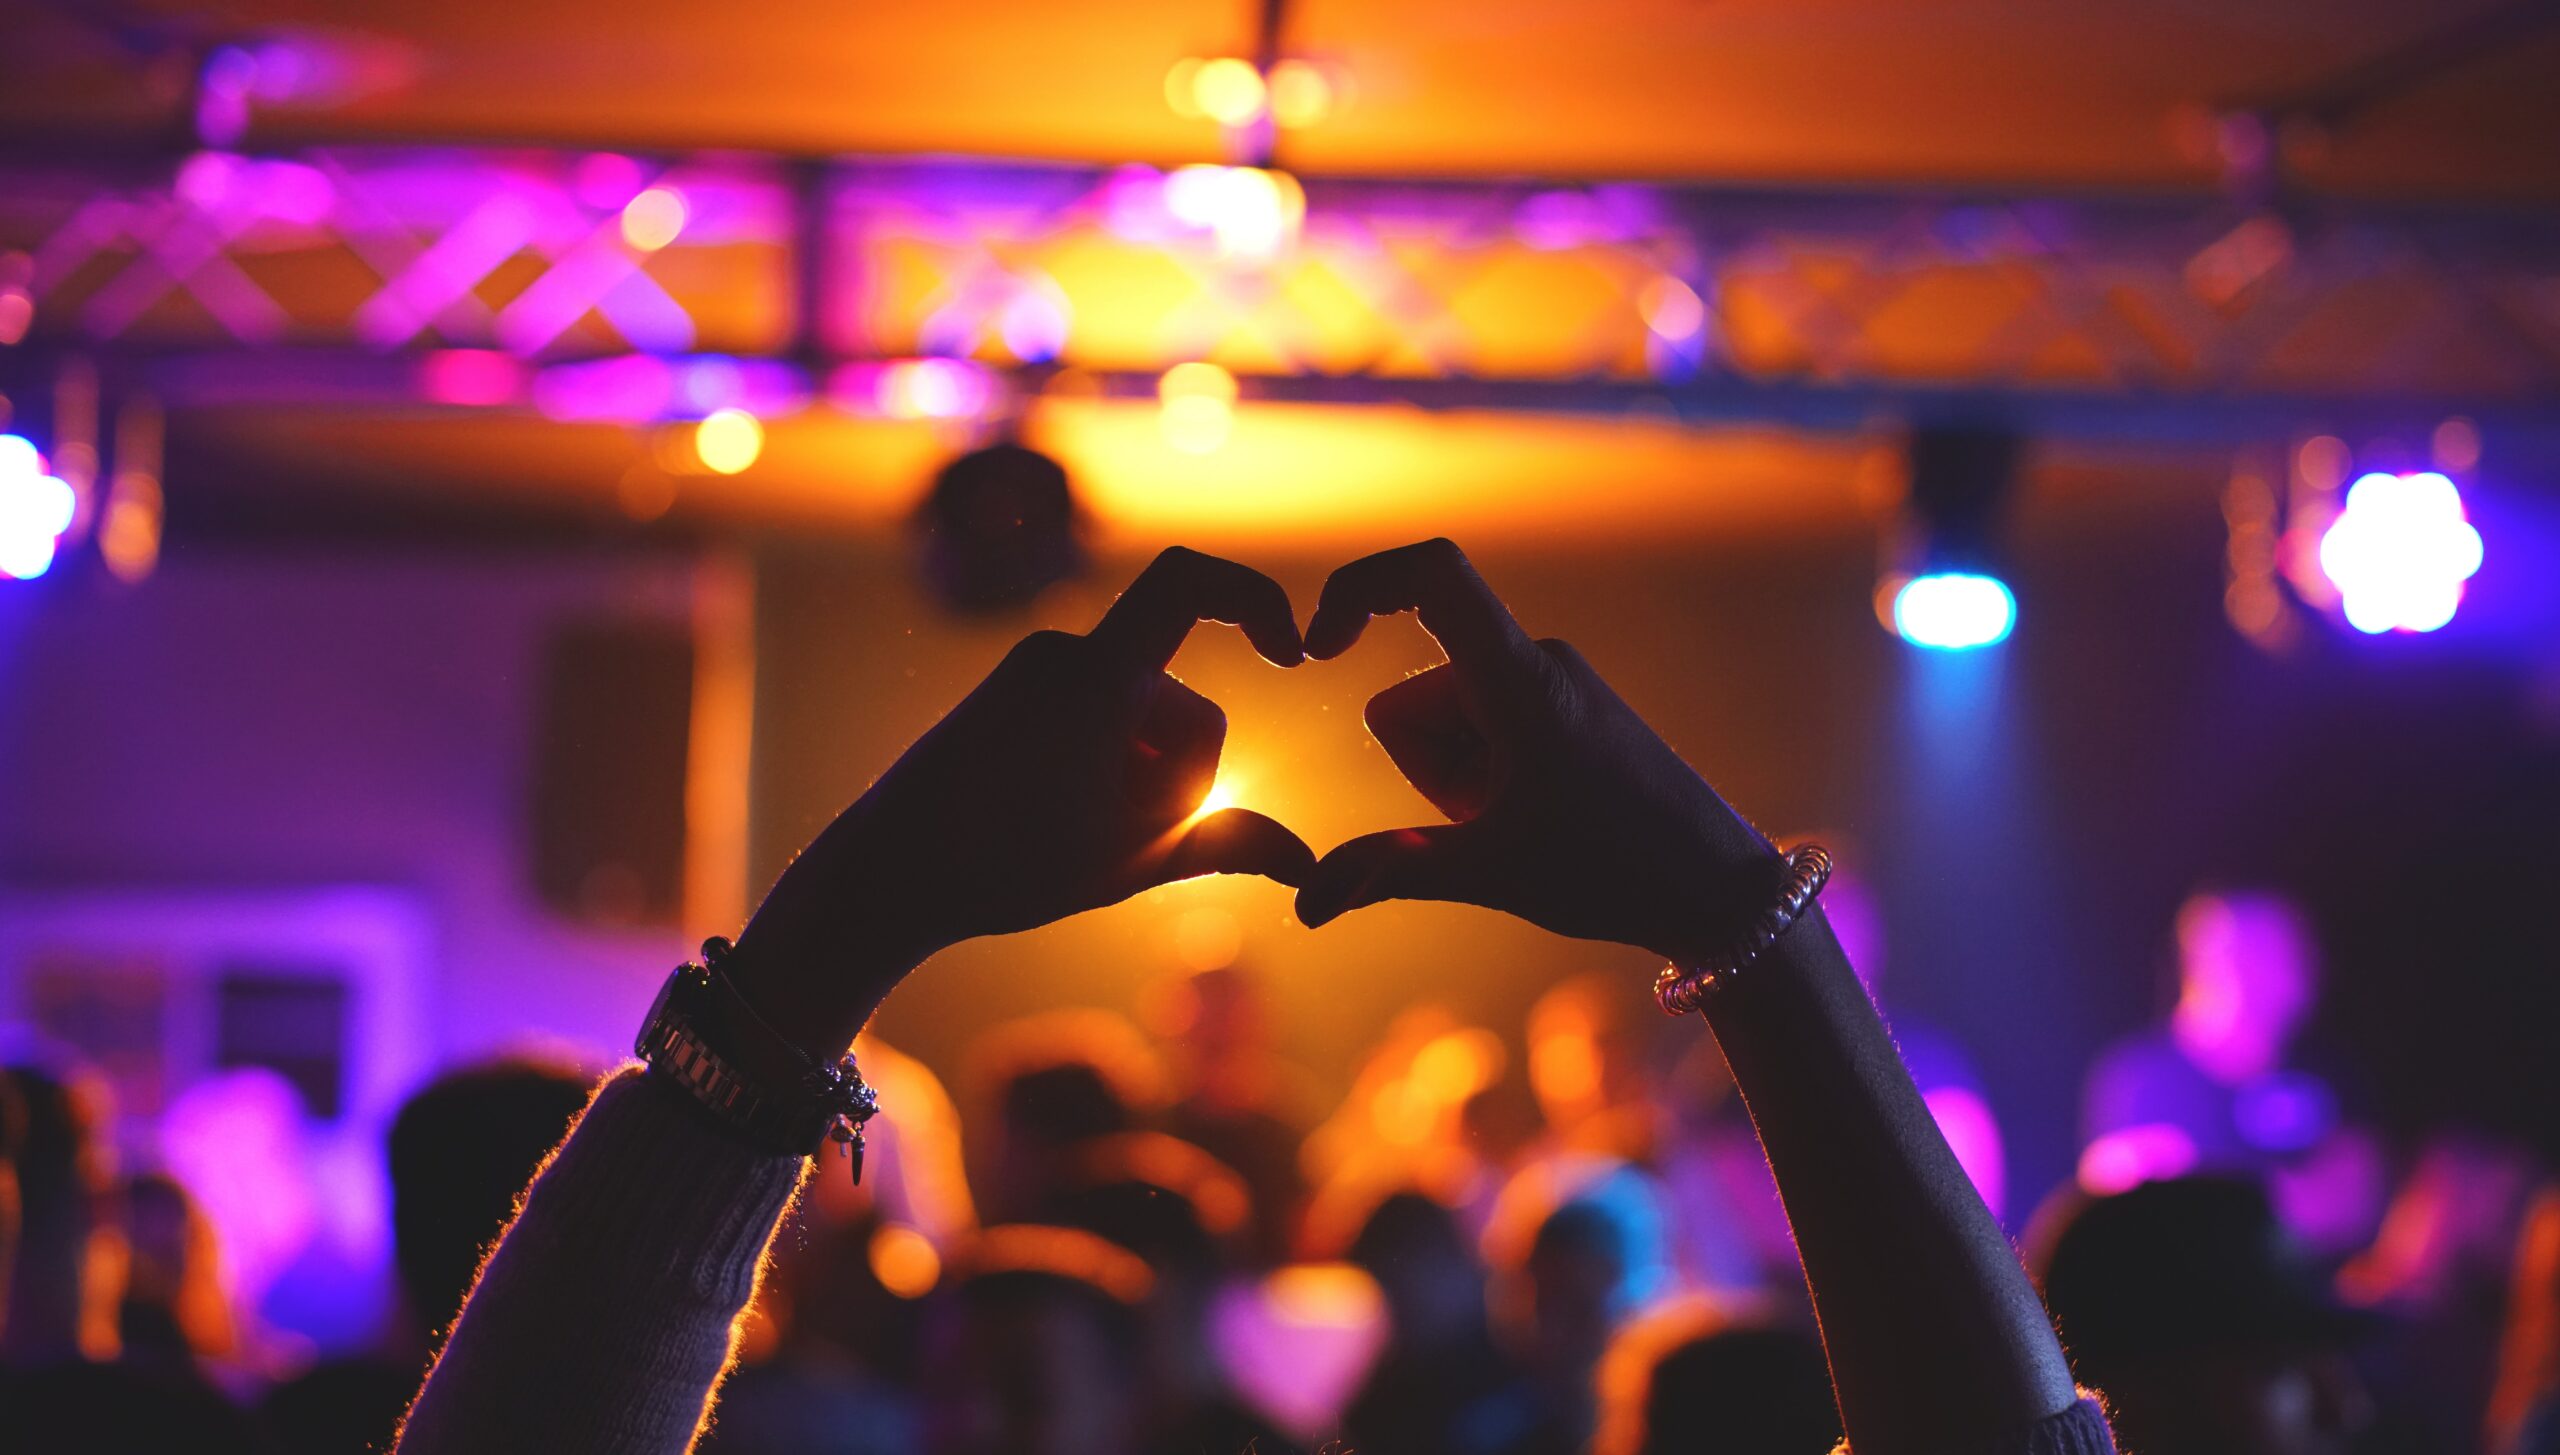 fingers in heart shape above a busy club with pink and yellow lighting